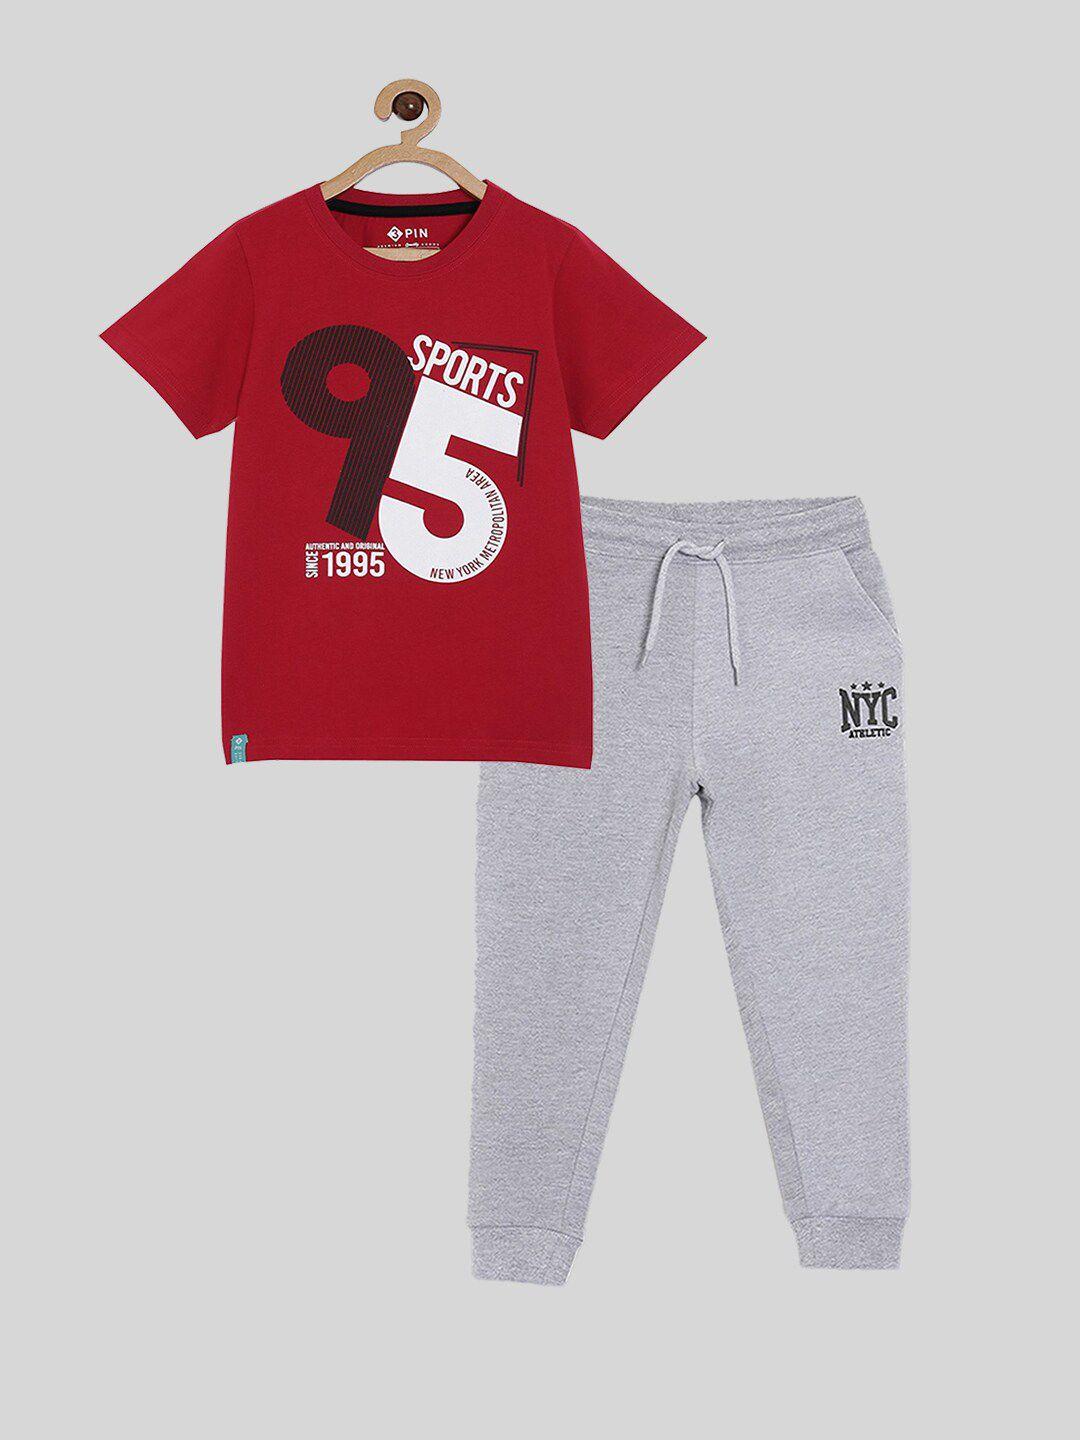 3pin-boys-maroon-&-grey-printed-pure-cotton-t-shirt-with-joggers